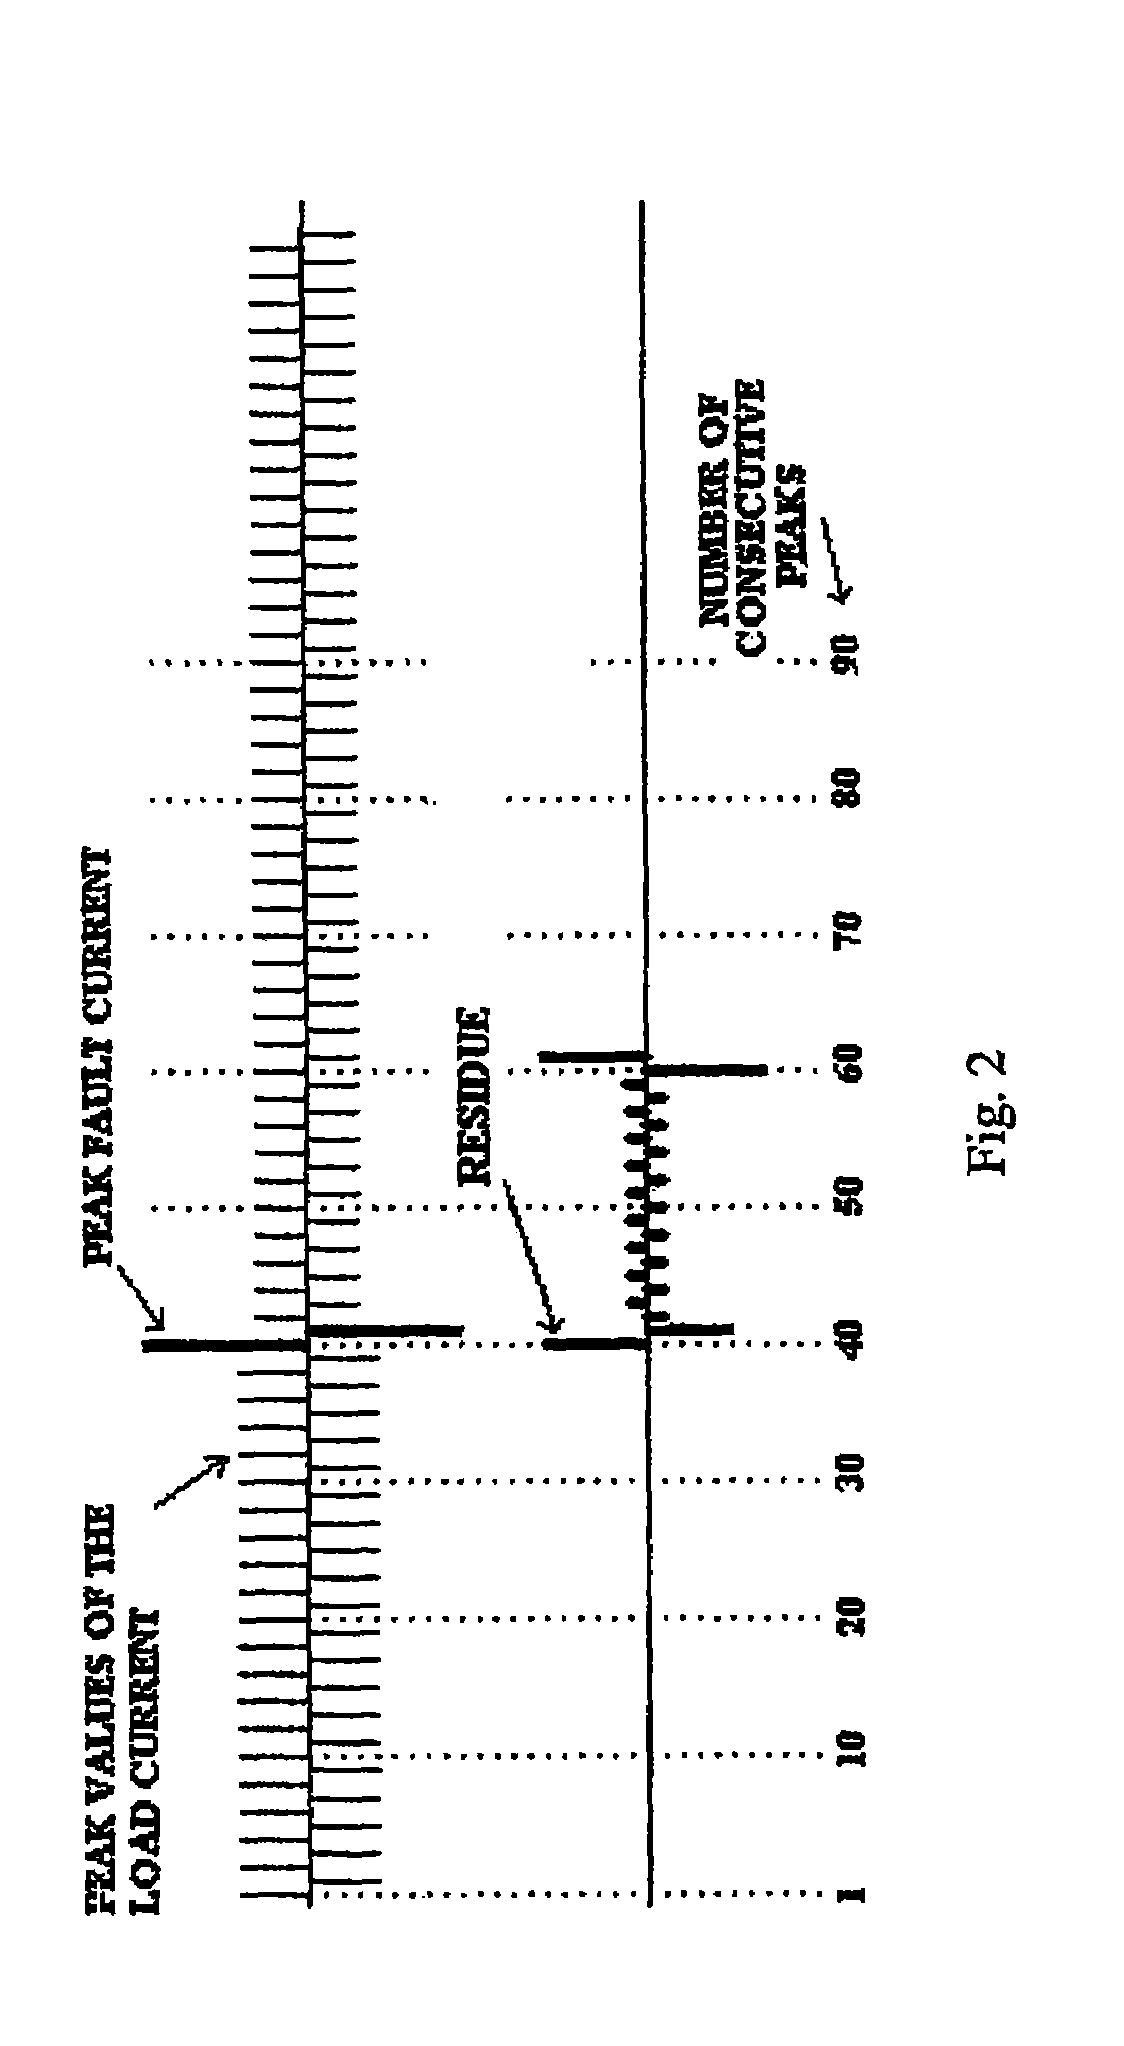 Intelligent fault detector system and method